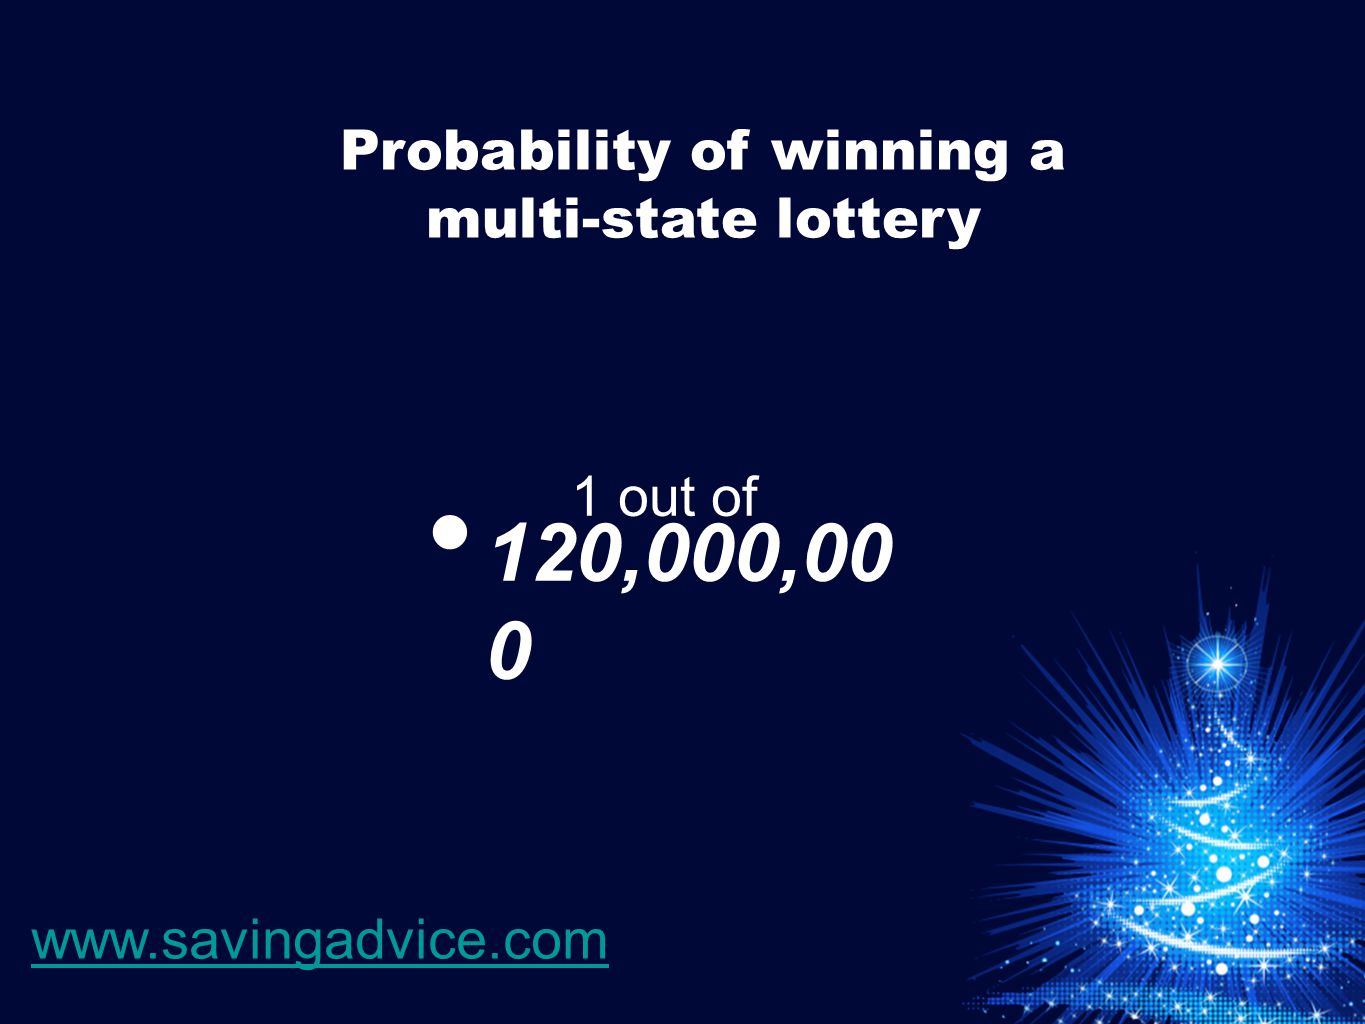 120,000, out of Probability of winning a multi-state lottery